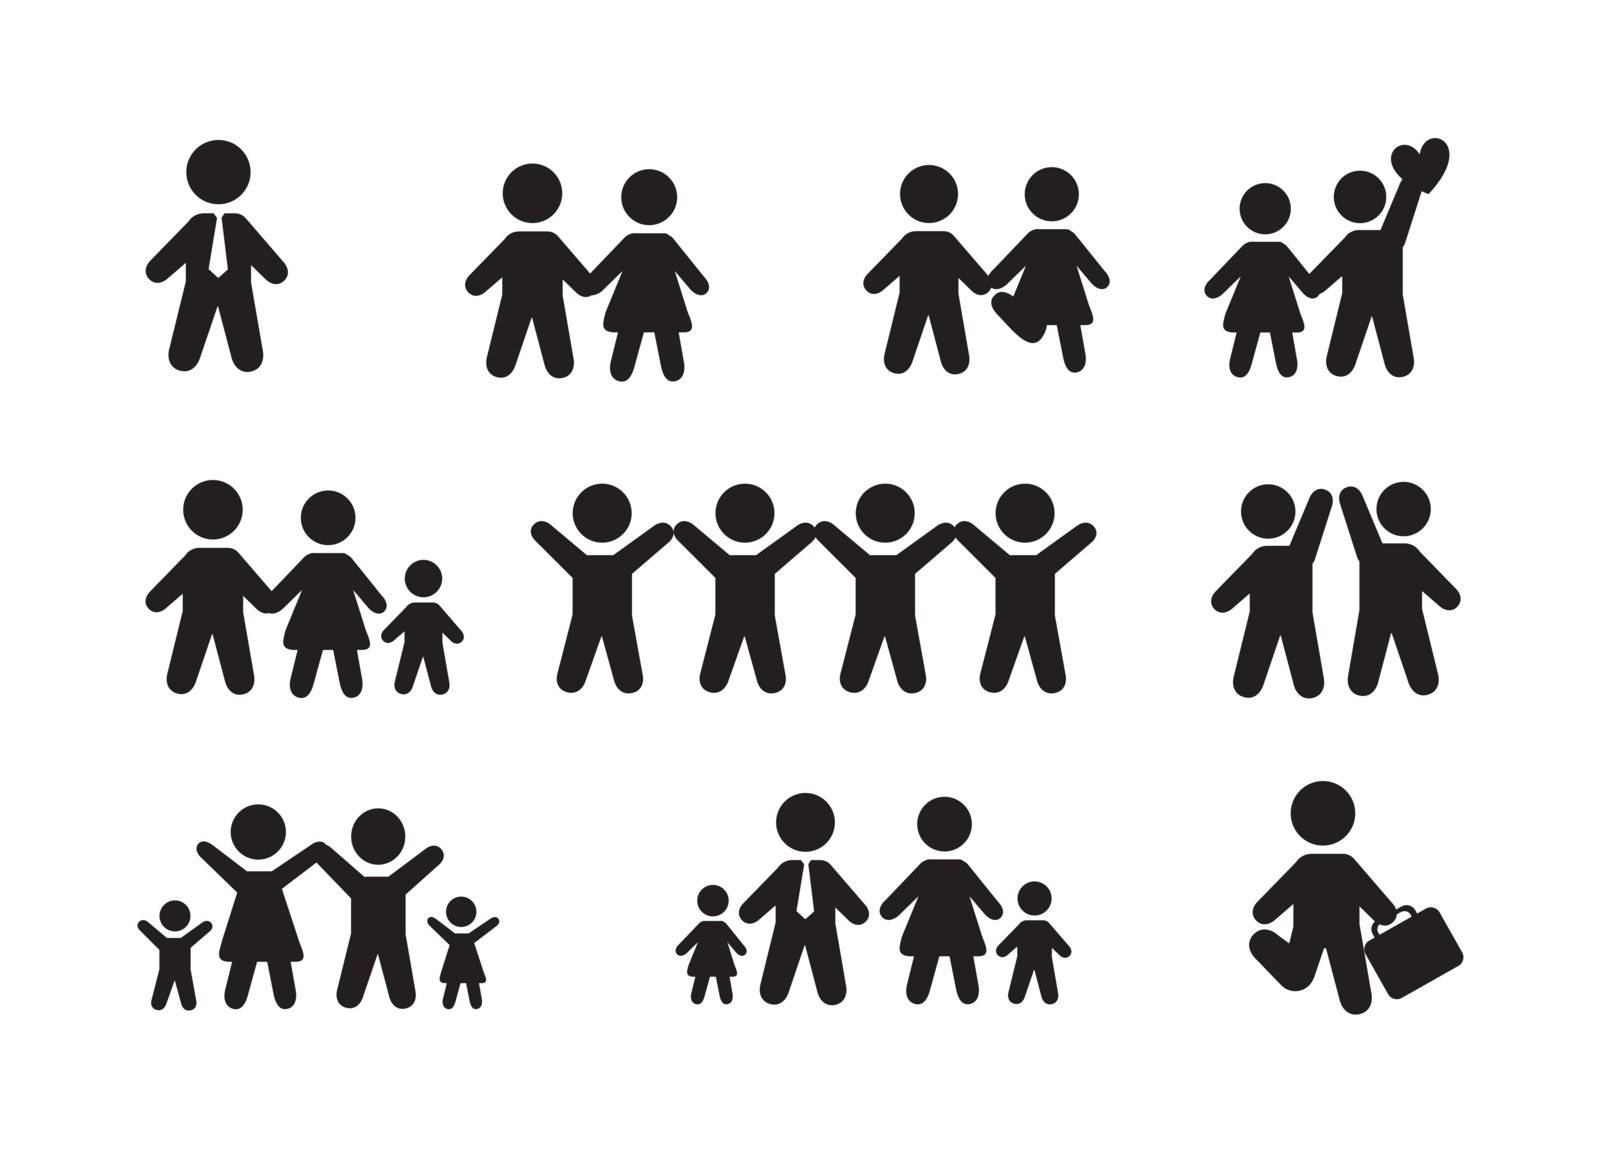 Silhouette people icons over white background vector illustration